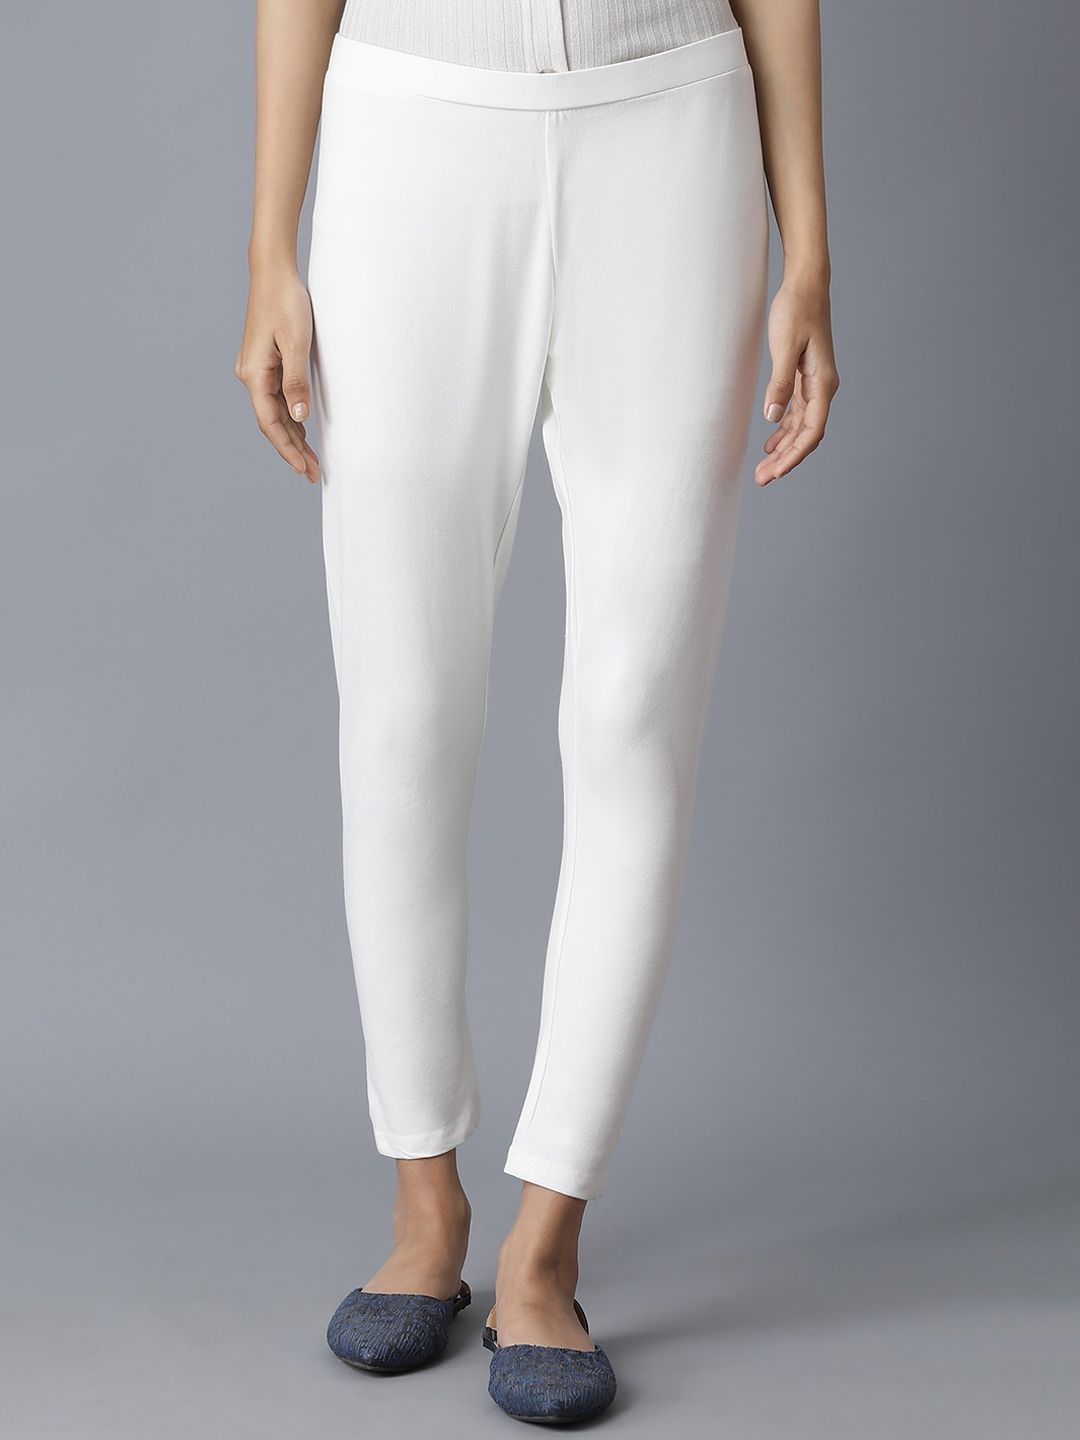 W Women White Slim Fit Trousers Price in India